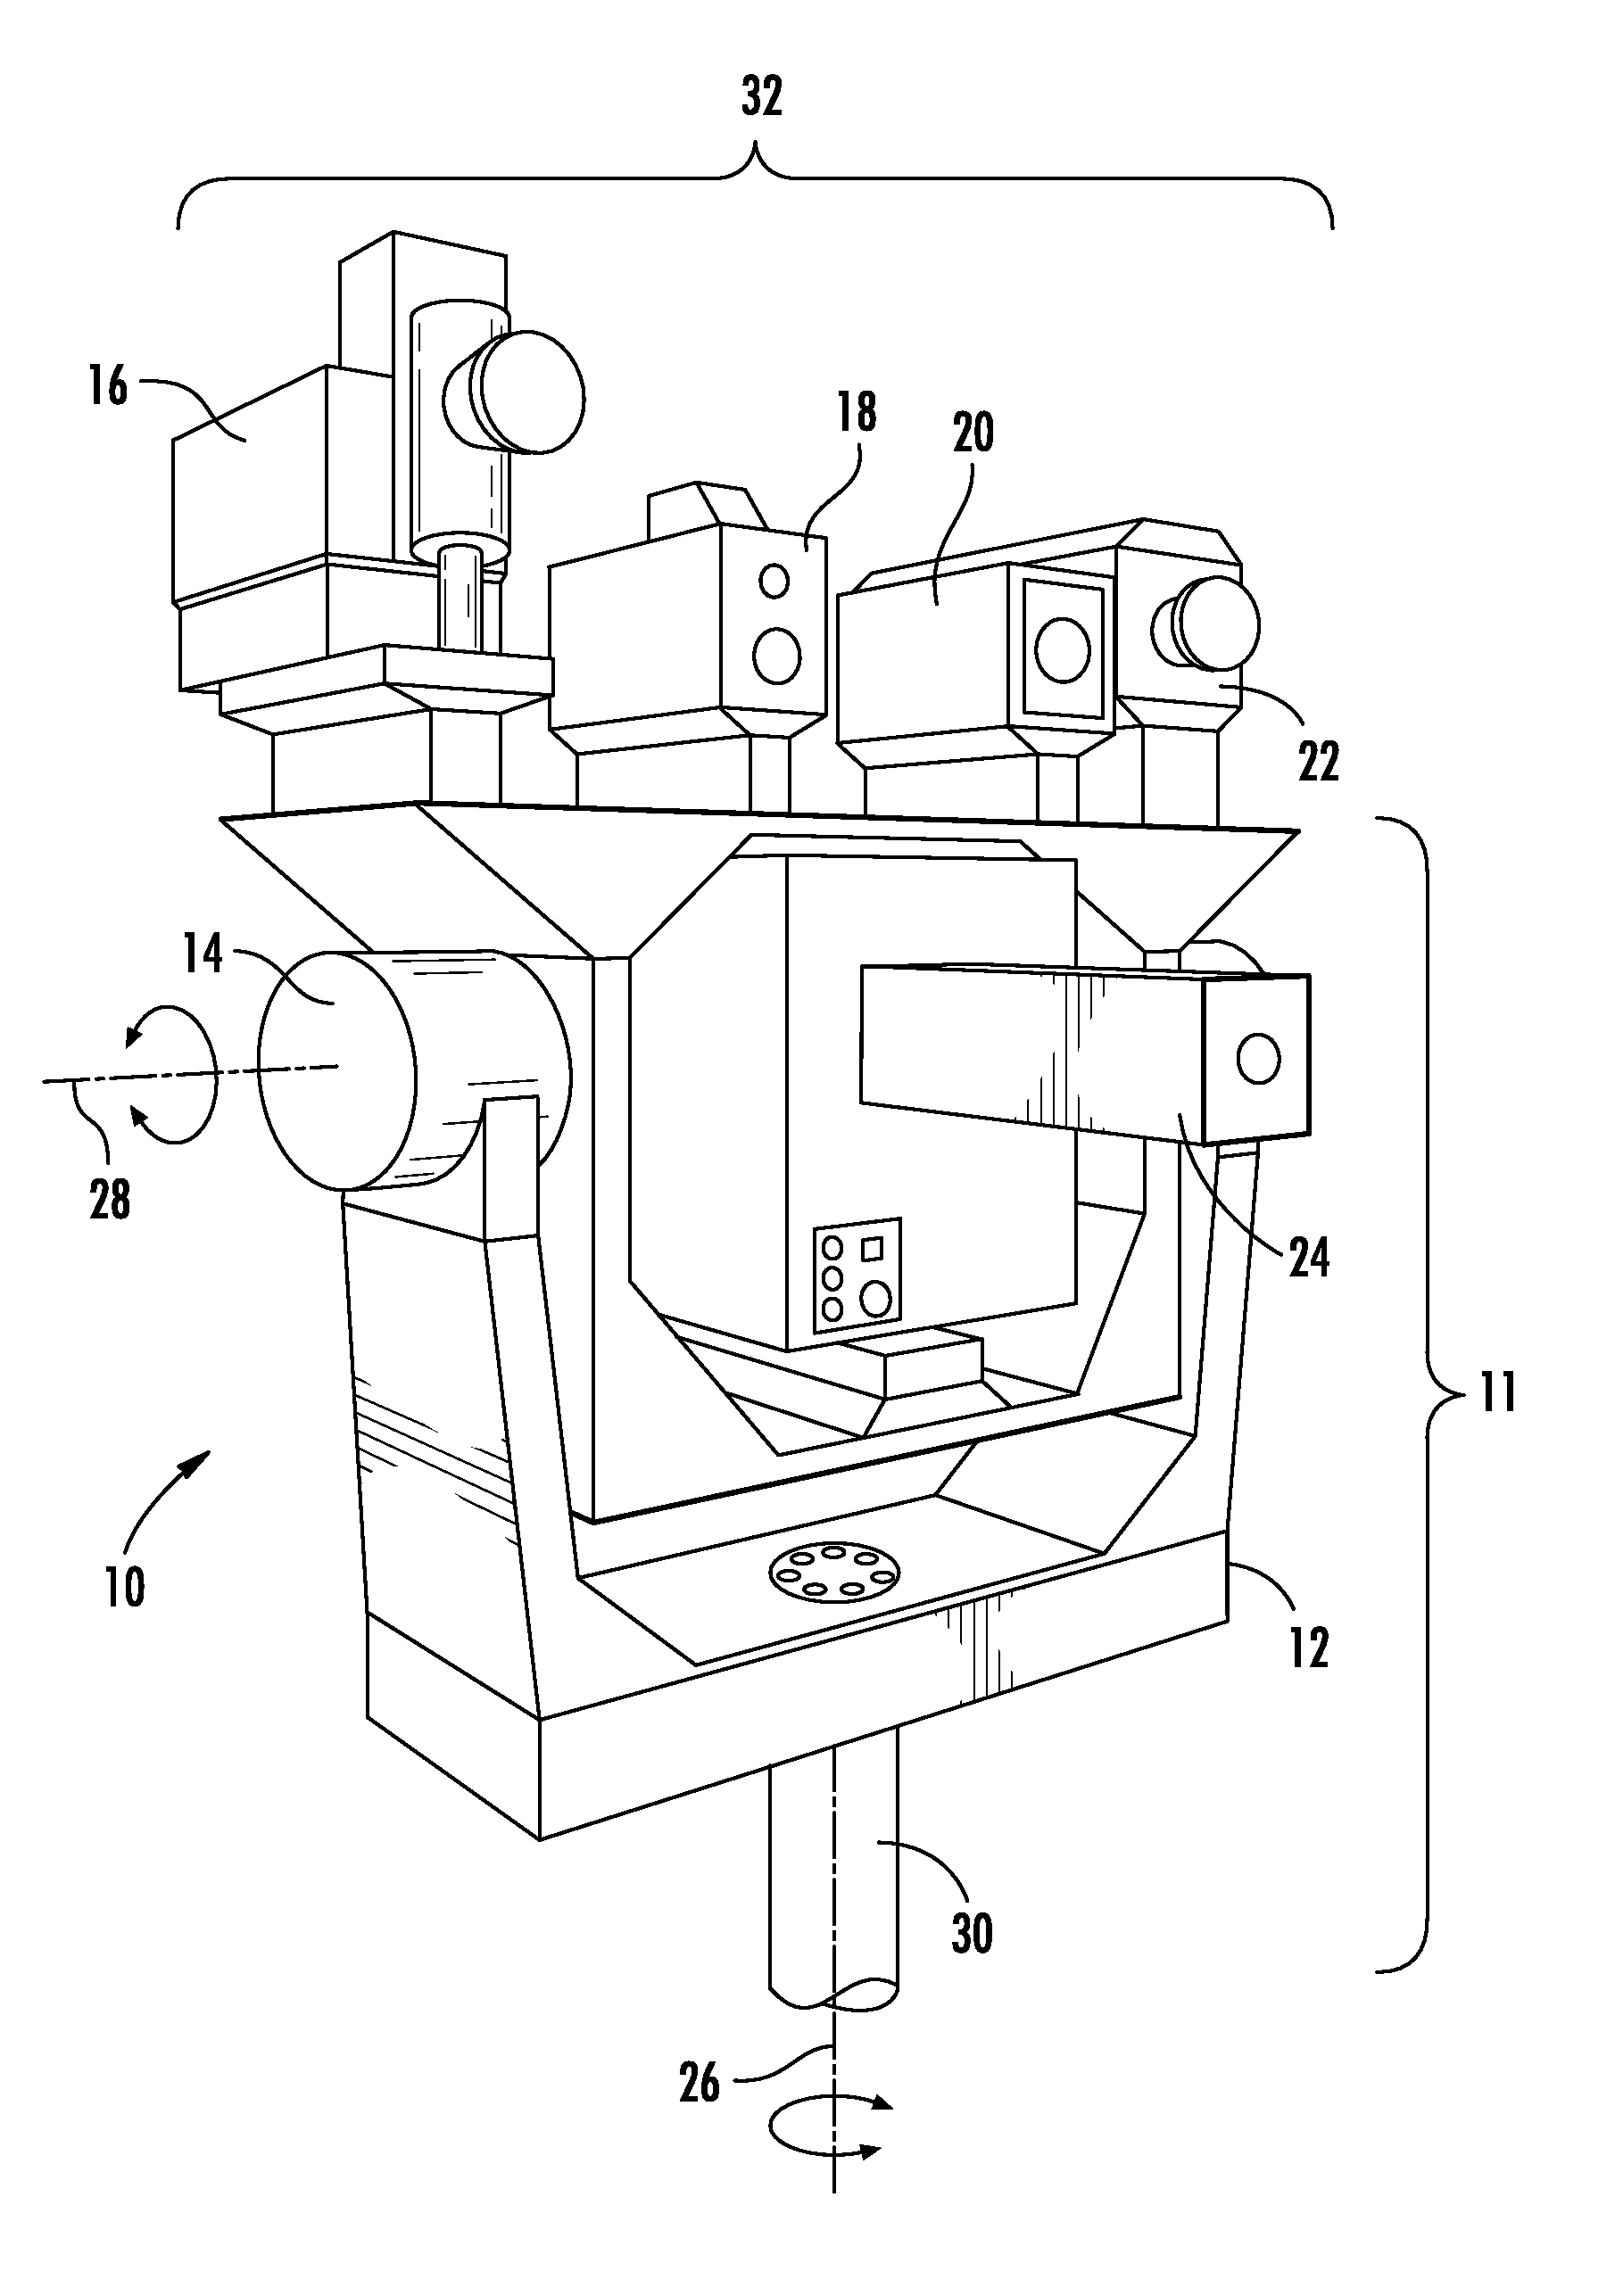 Method and Apparatus for Acquiring Accurate Background Infrared Signature Data on Moving Targets